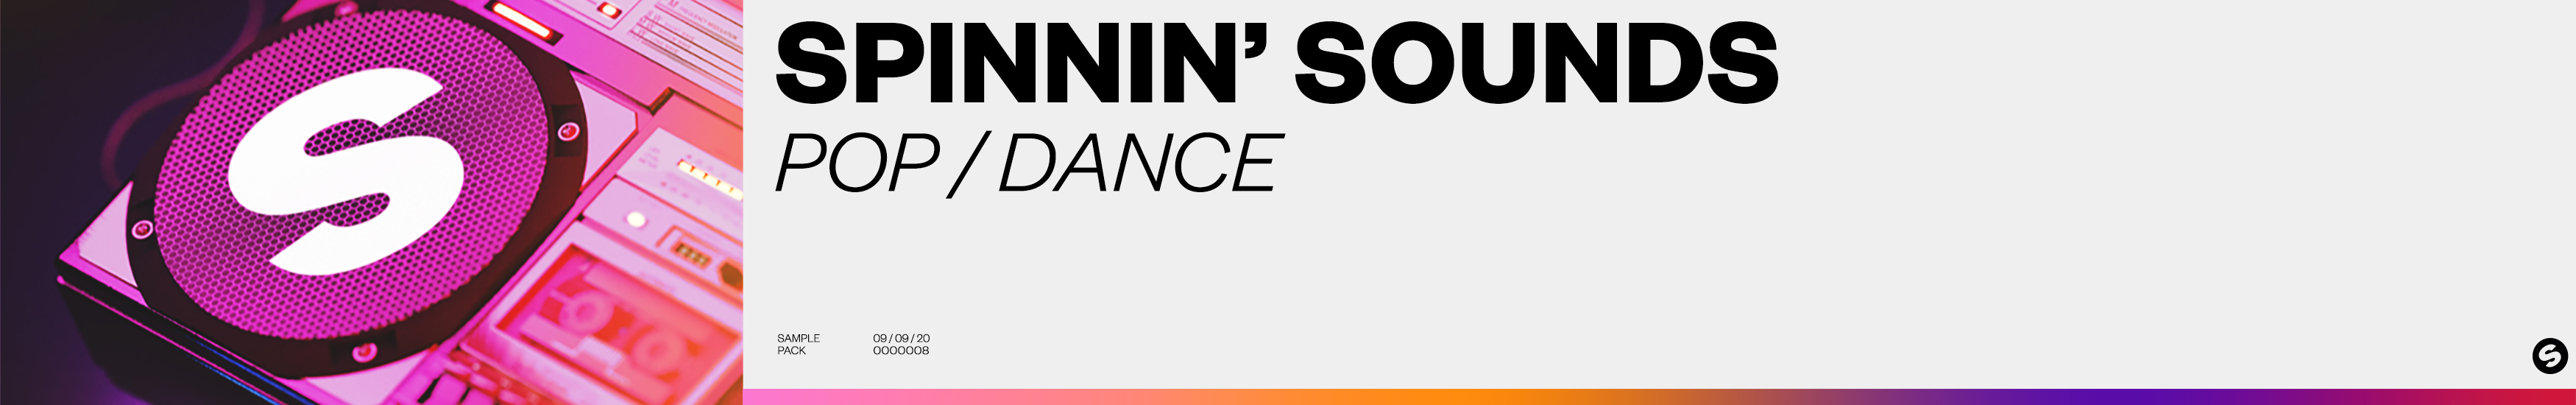 Spinnin’ and Splice unite once again for Spinnin Sounds - Pop / Dance